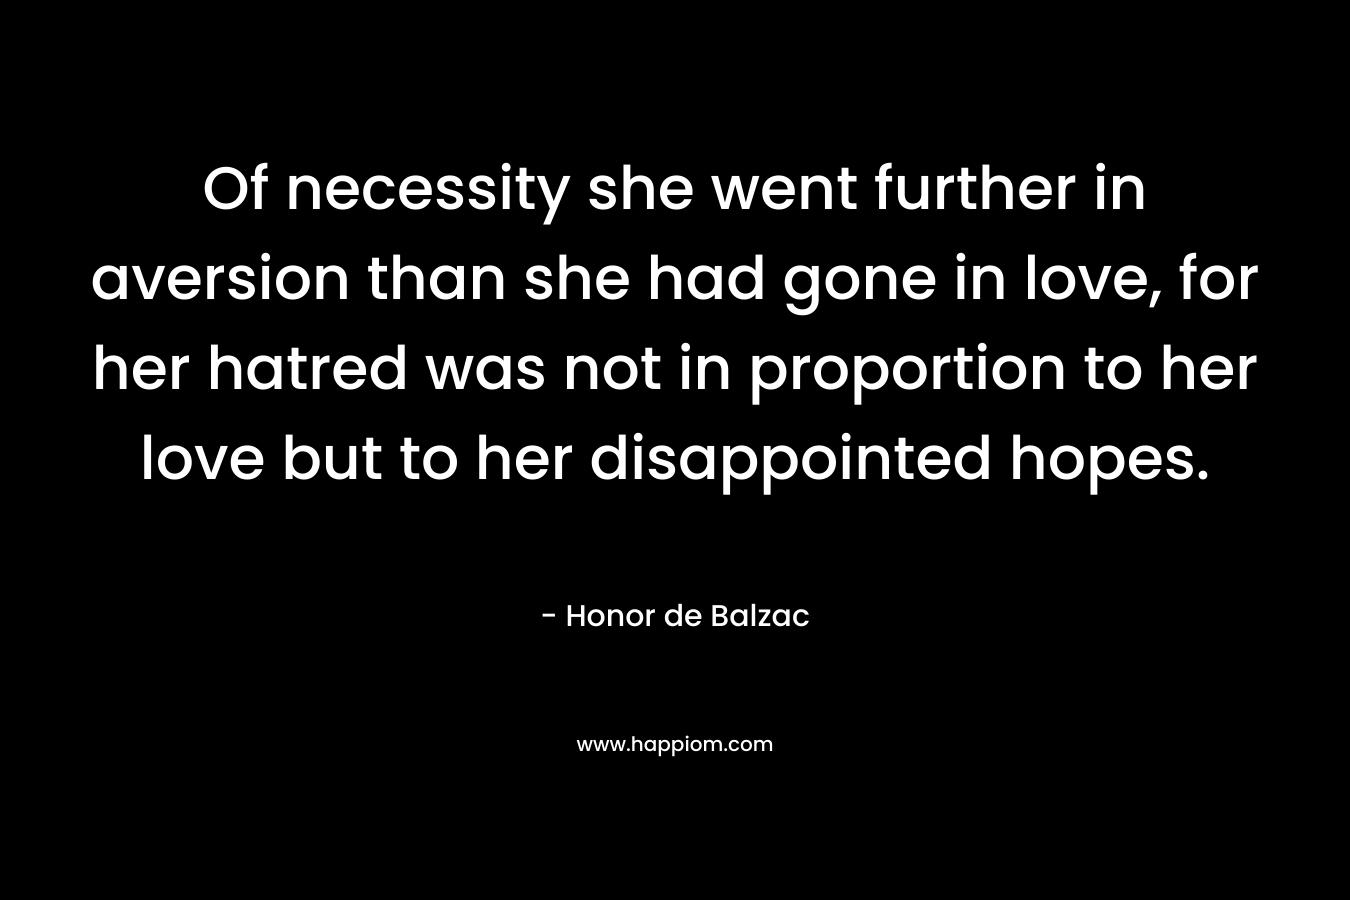 Of necessity she went further in aversion than she had gone in love, for her hatred was not in proportion to her love but to her disappointed hopes.